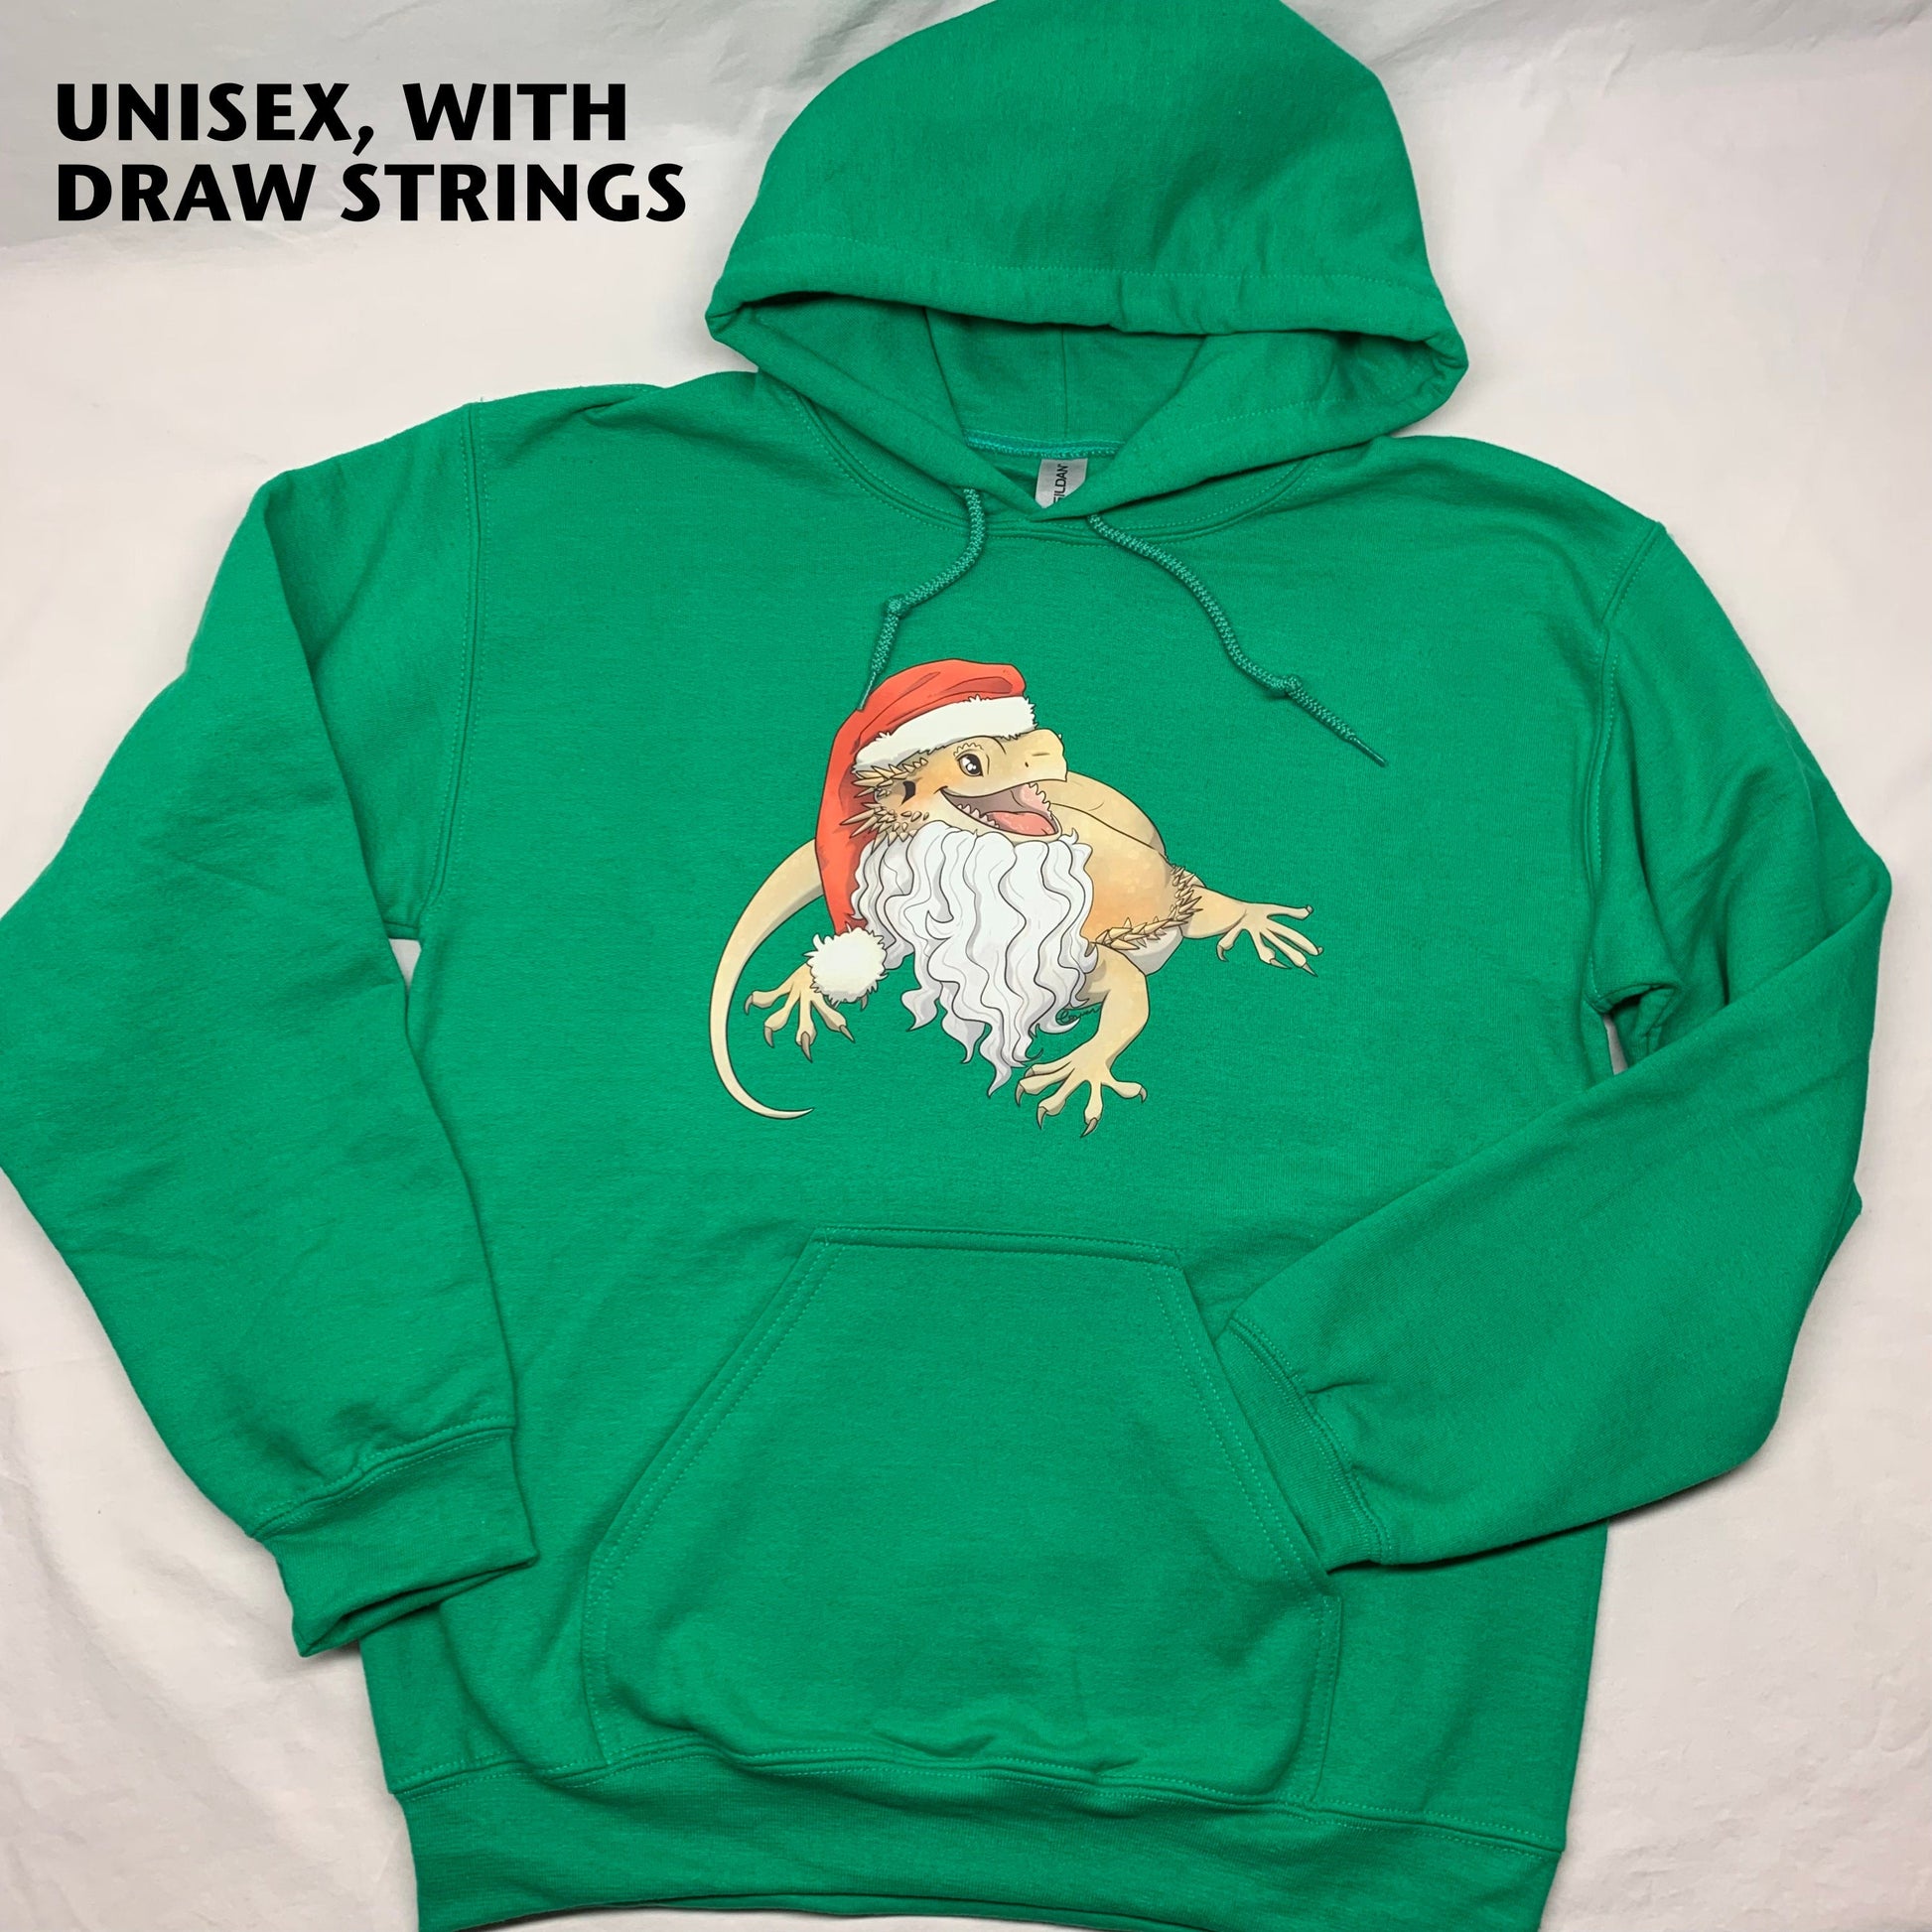 A photo of Amphisbaena Exotics original art of a cartoon realistic bearded dragon, smiling and wearing a Santa hat and beard on a Kelly green pullover hoodie, showing that the unisex sizes have drawstrings in the hoodie. Christmas themed.